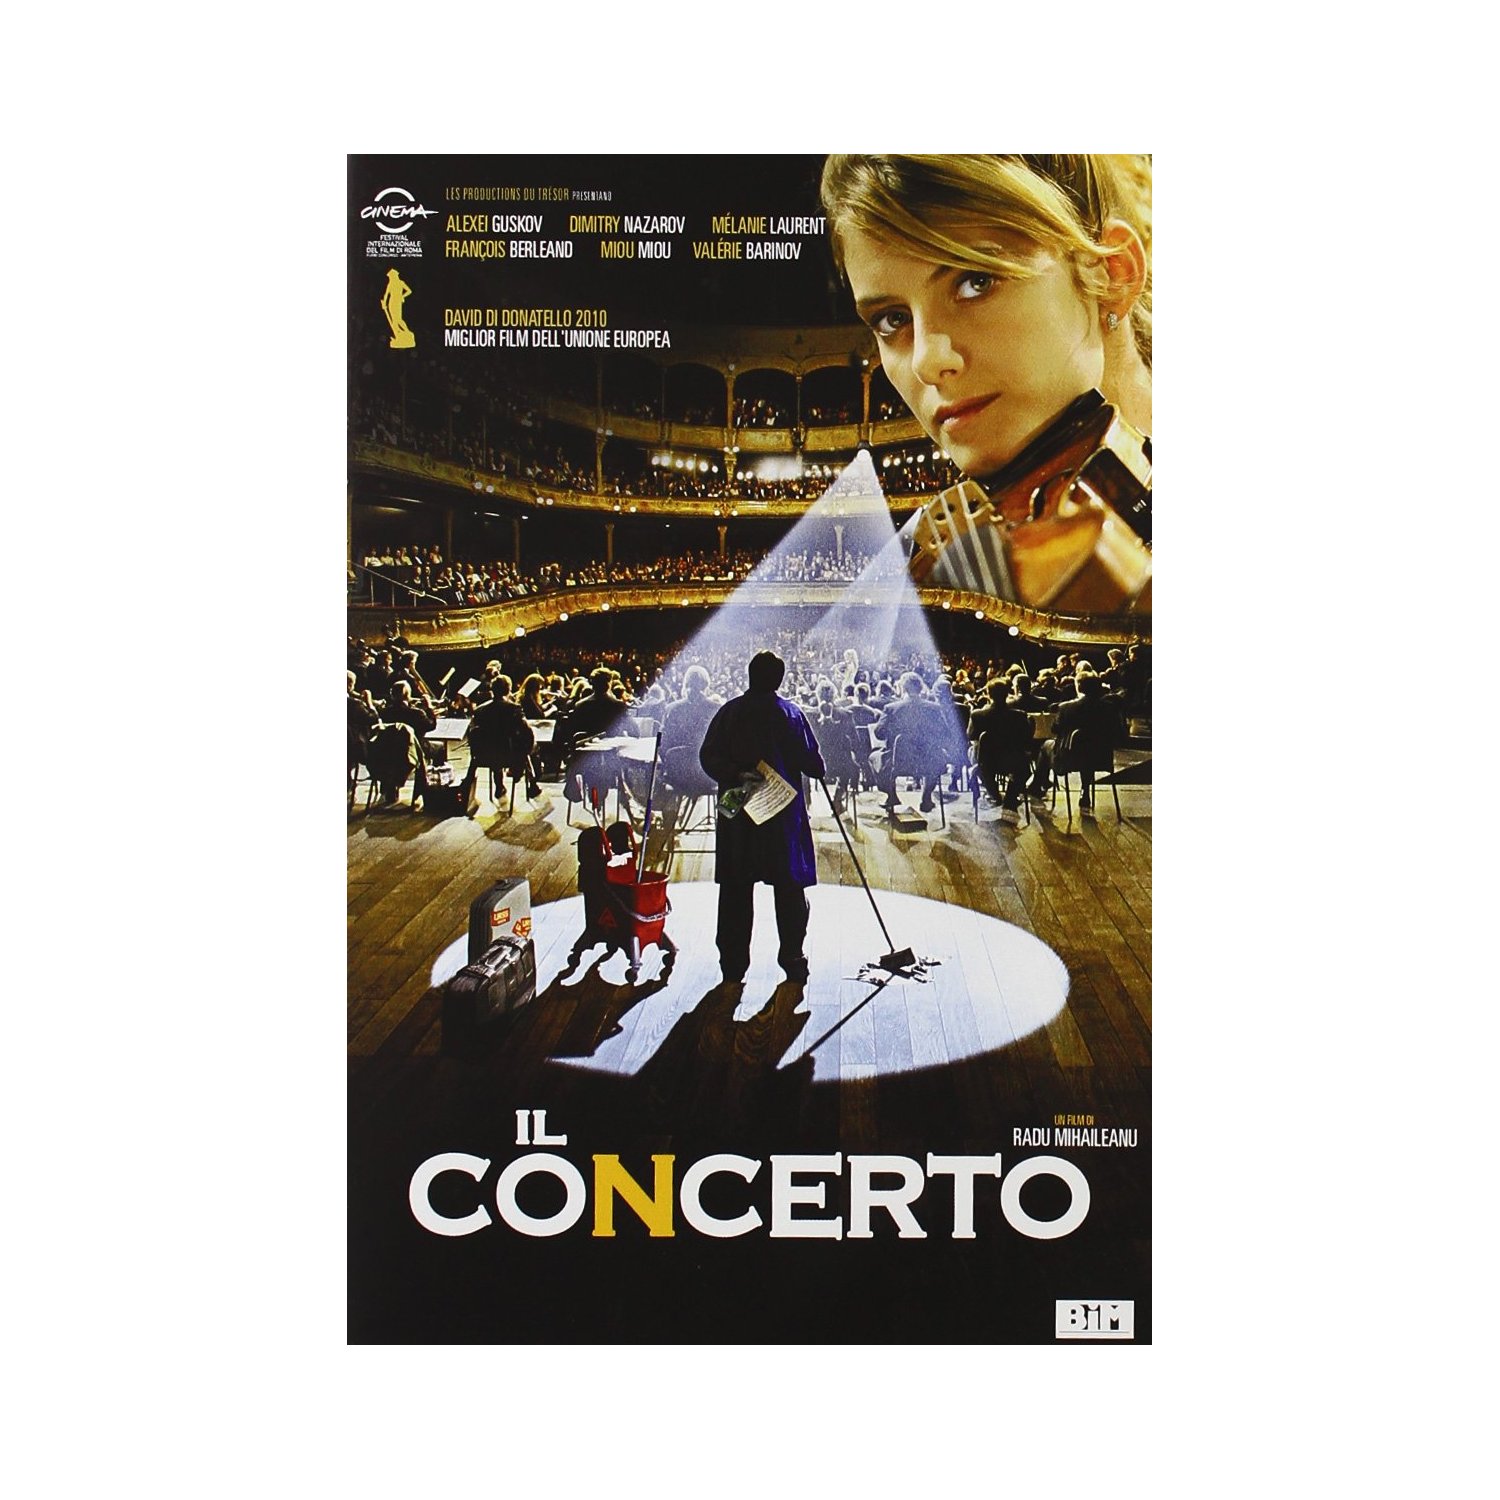 concerto.jpg-imported from BMW2